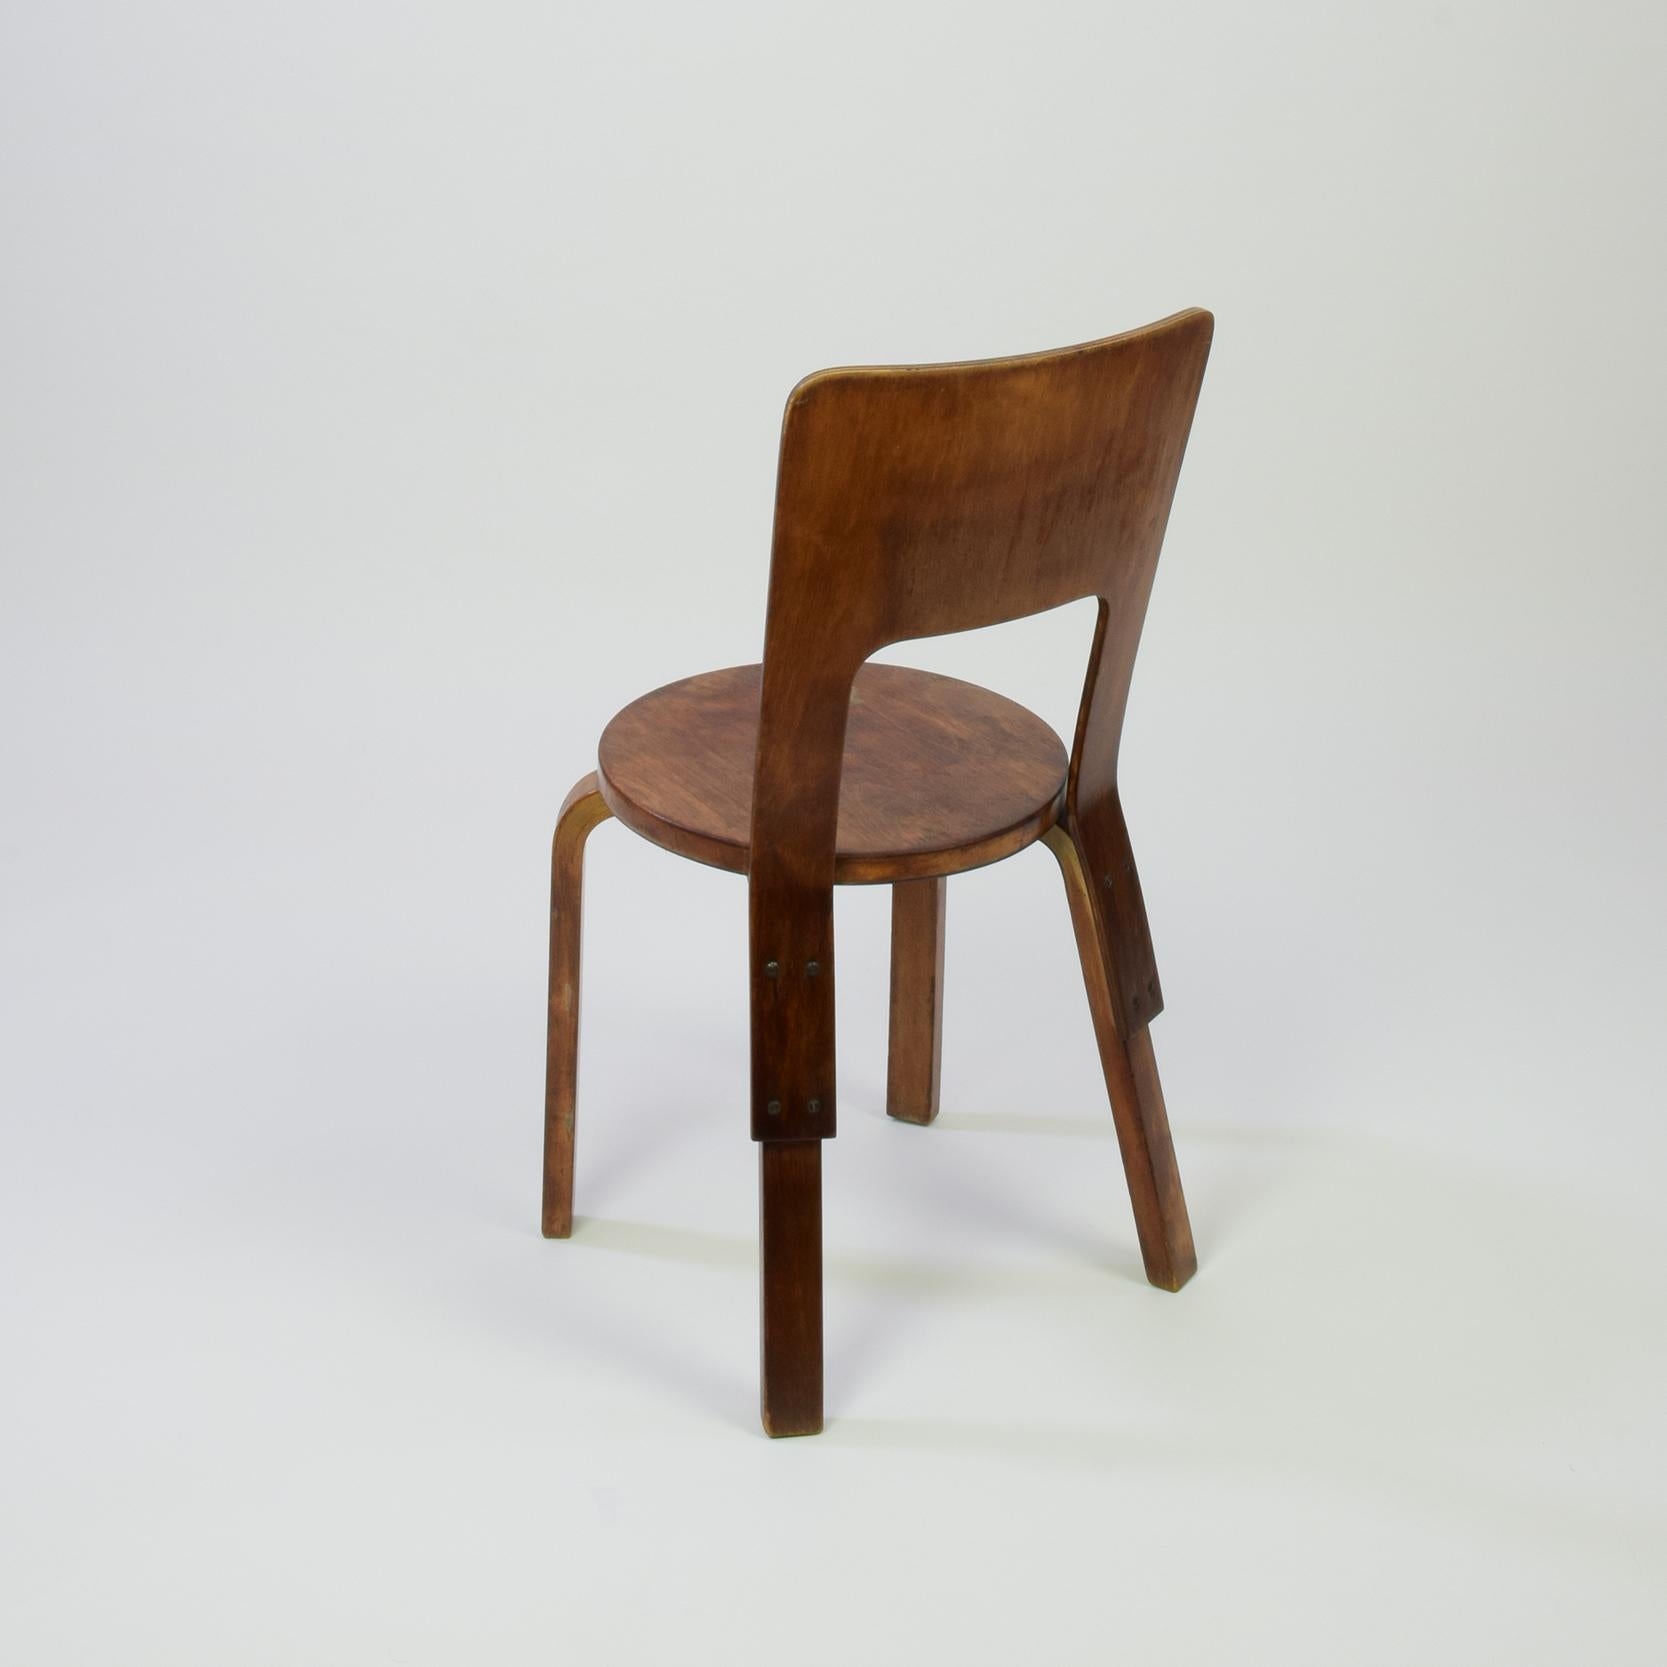 Alvar Aalto, Set of 3 Model 66 Chairs, 1933, Original Early Production 5